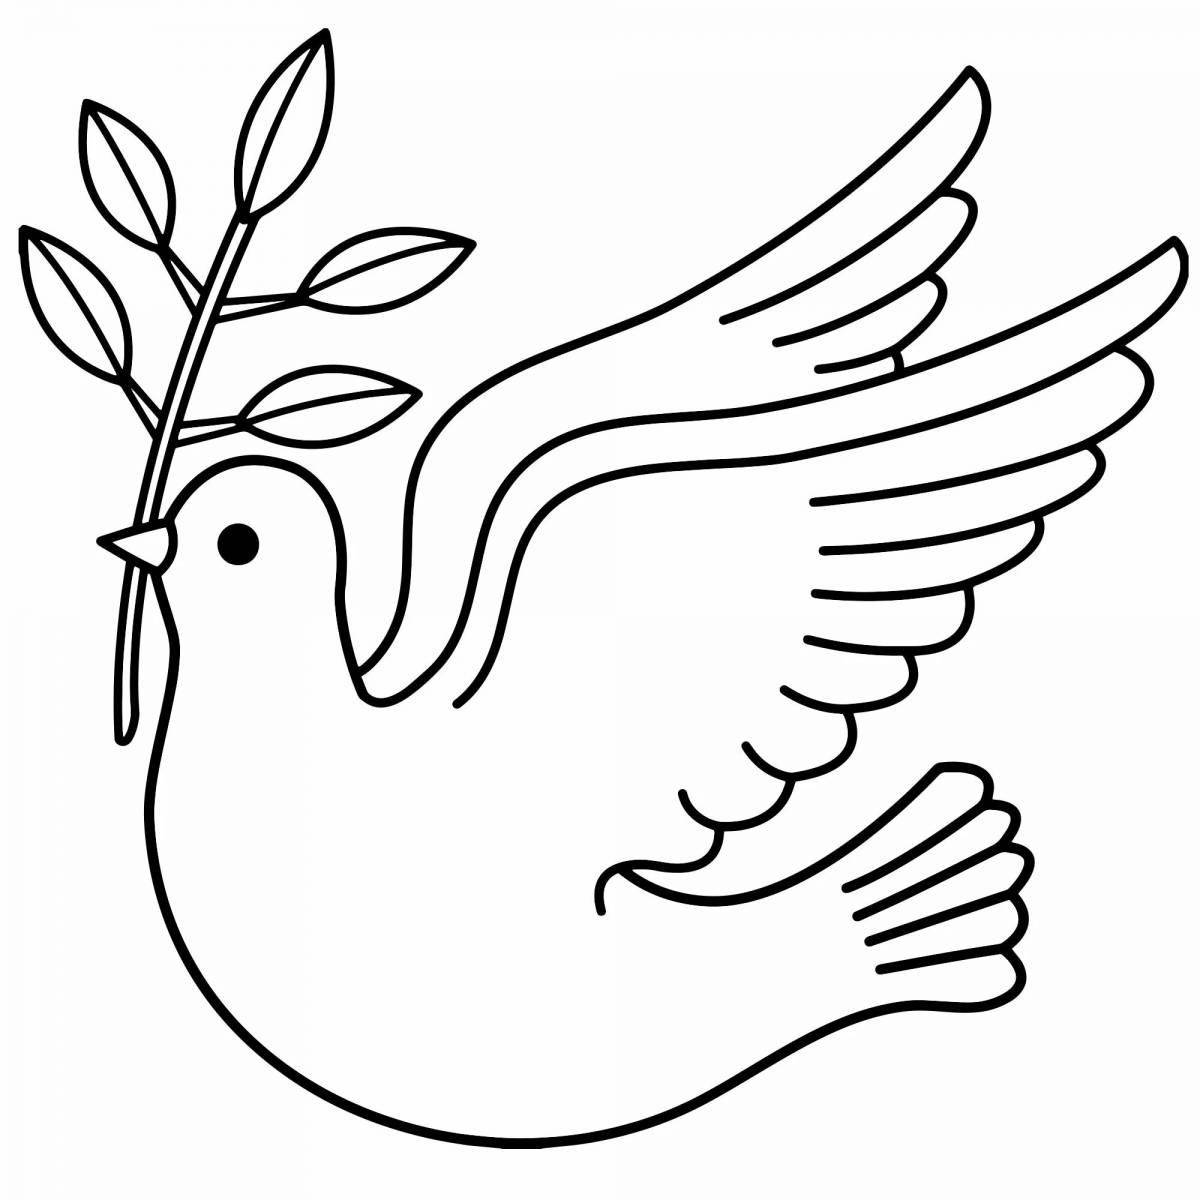 Exalted victory dove coloring page